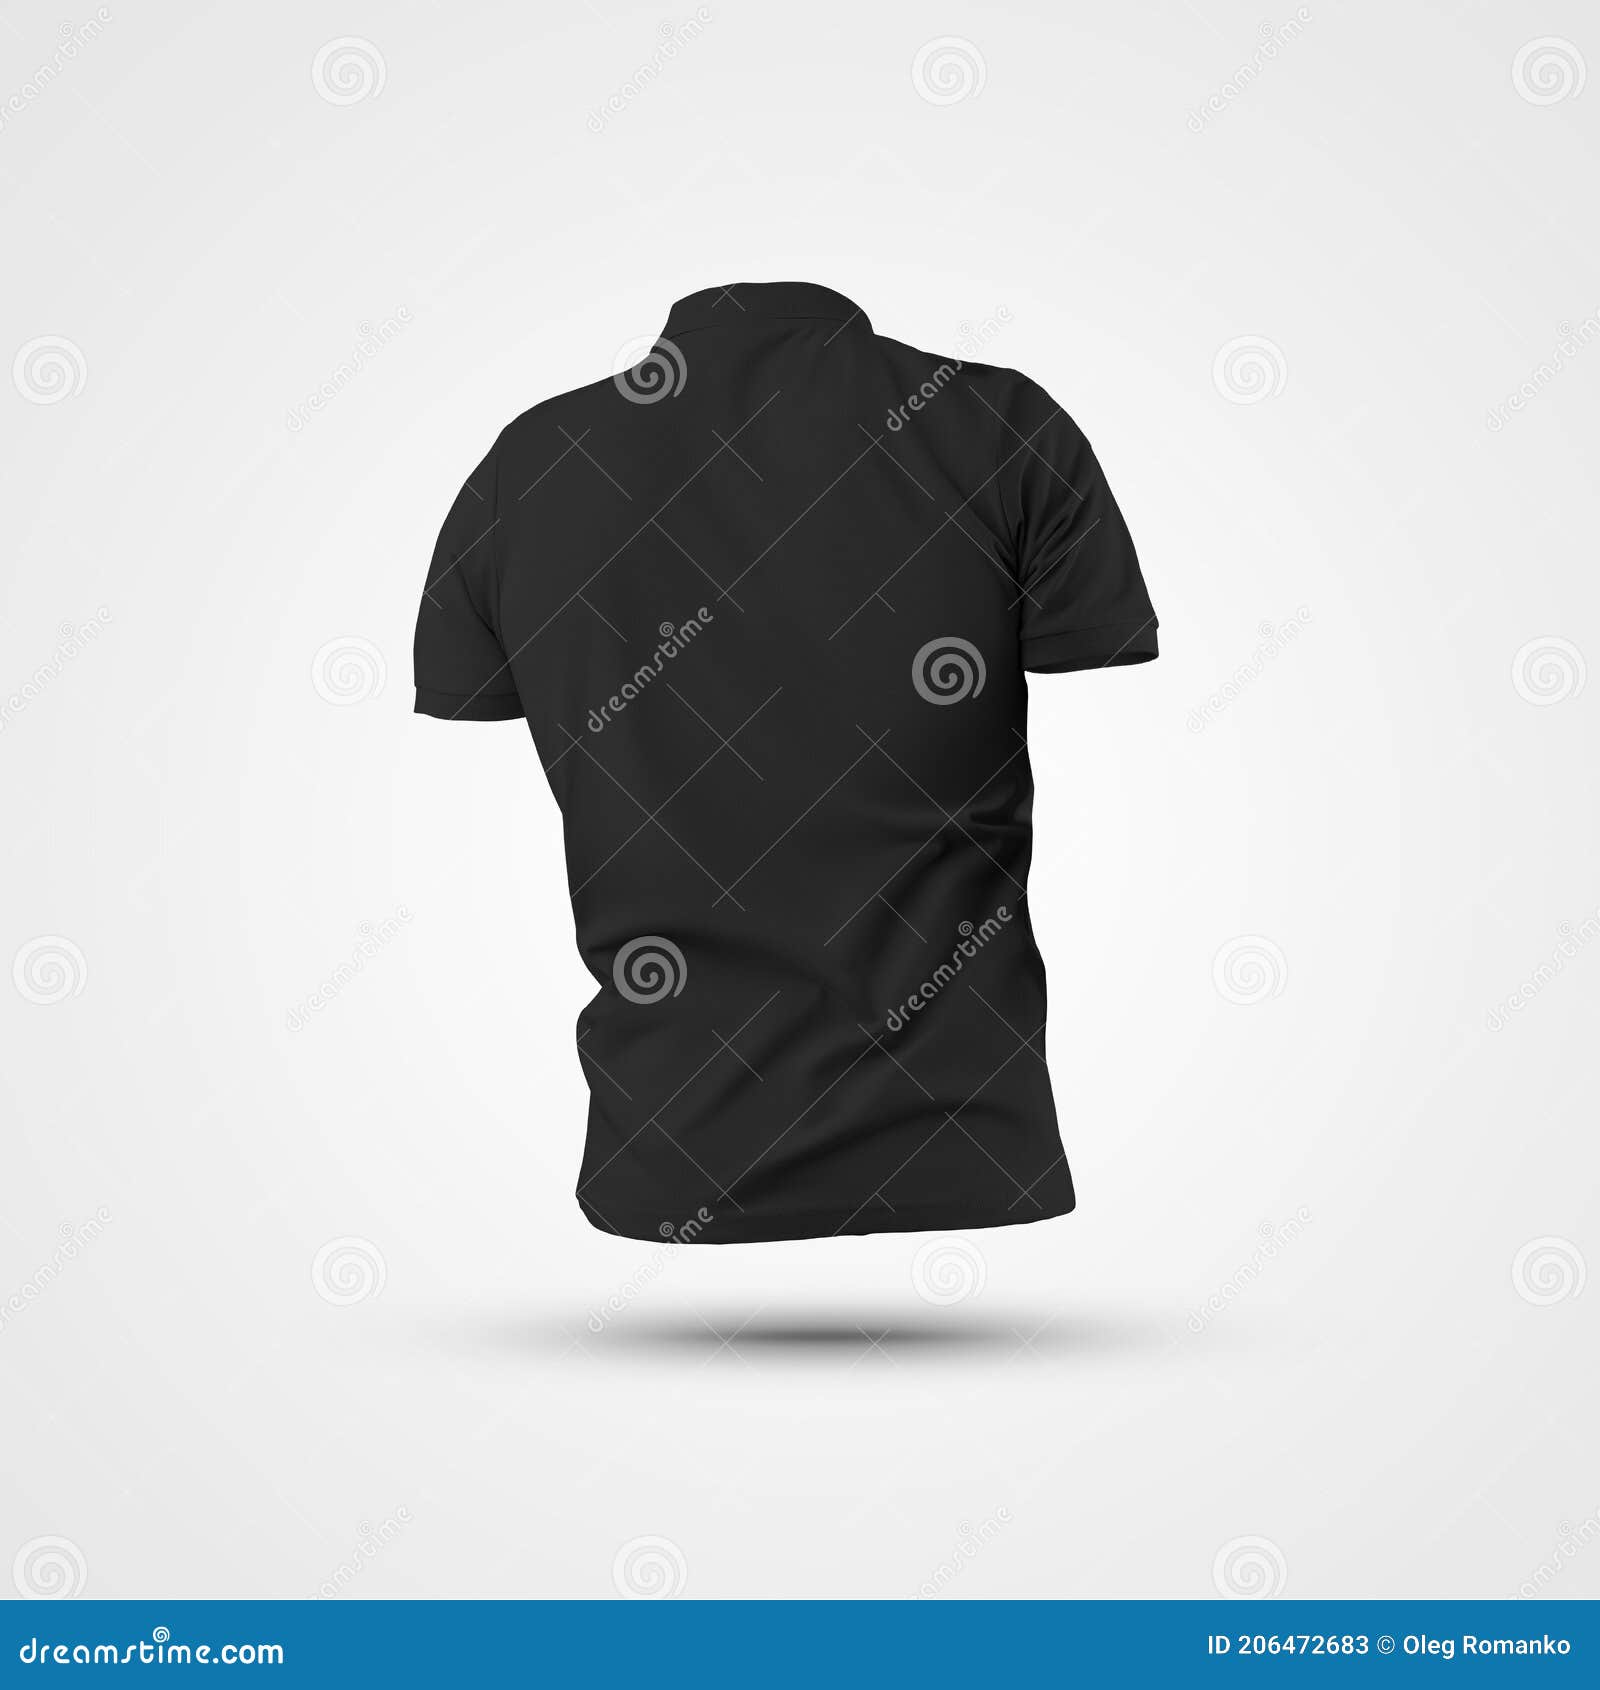 Mockup Black 3d Illustration of Male Shirt with Short Sleeves, Collar ...